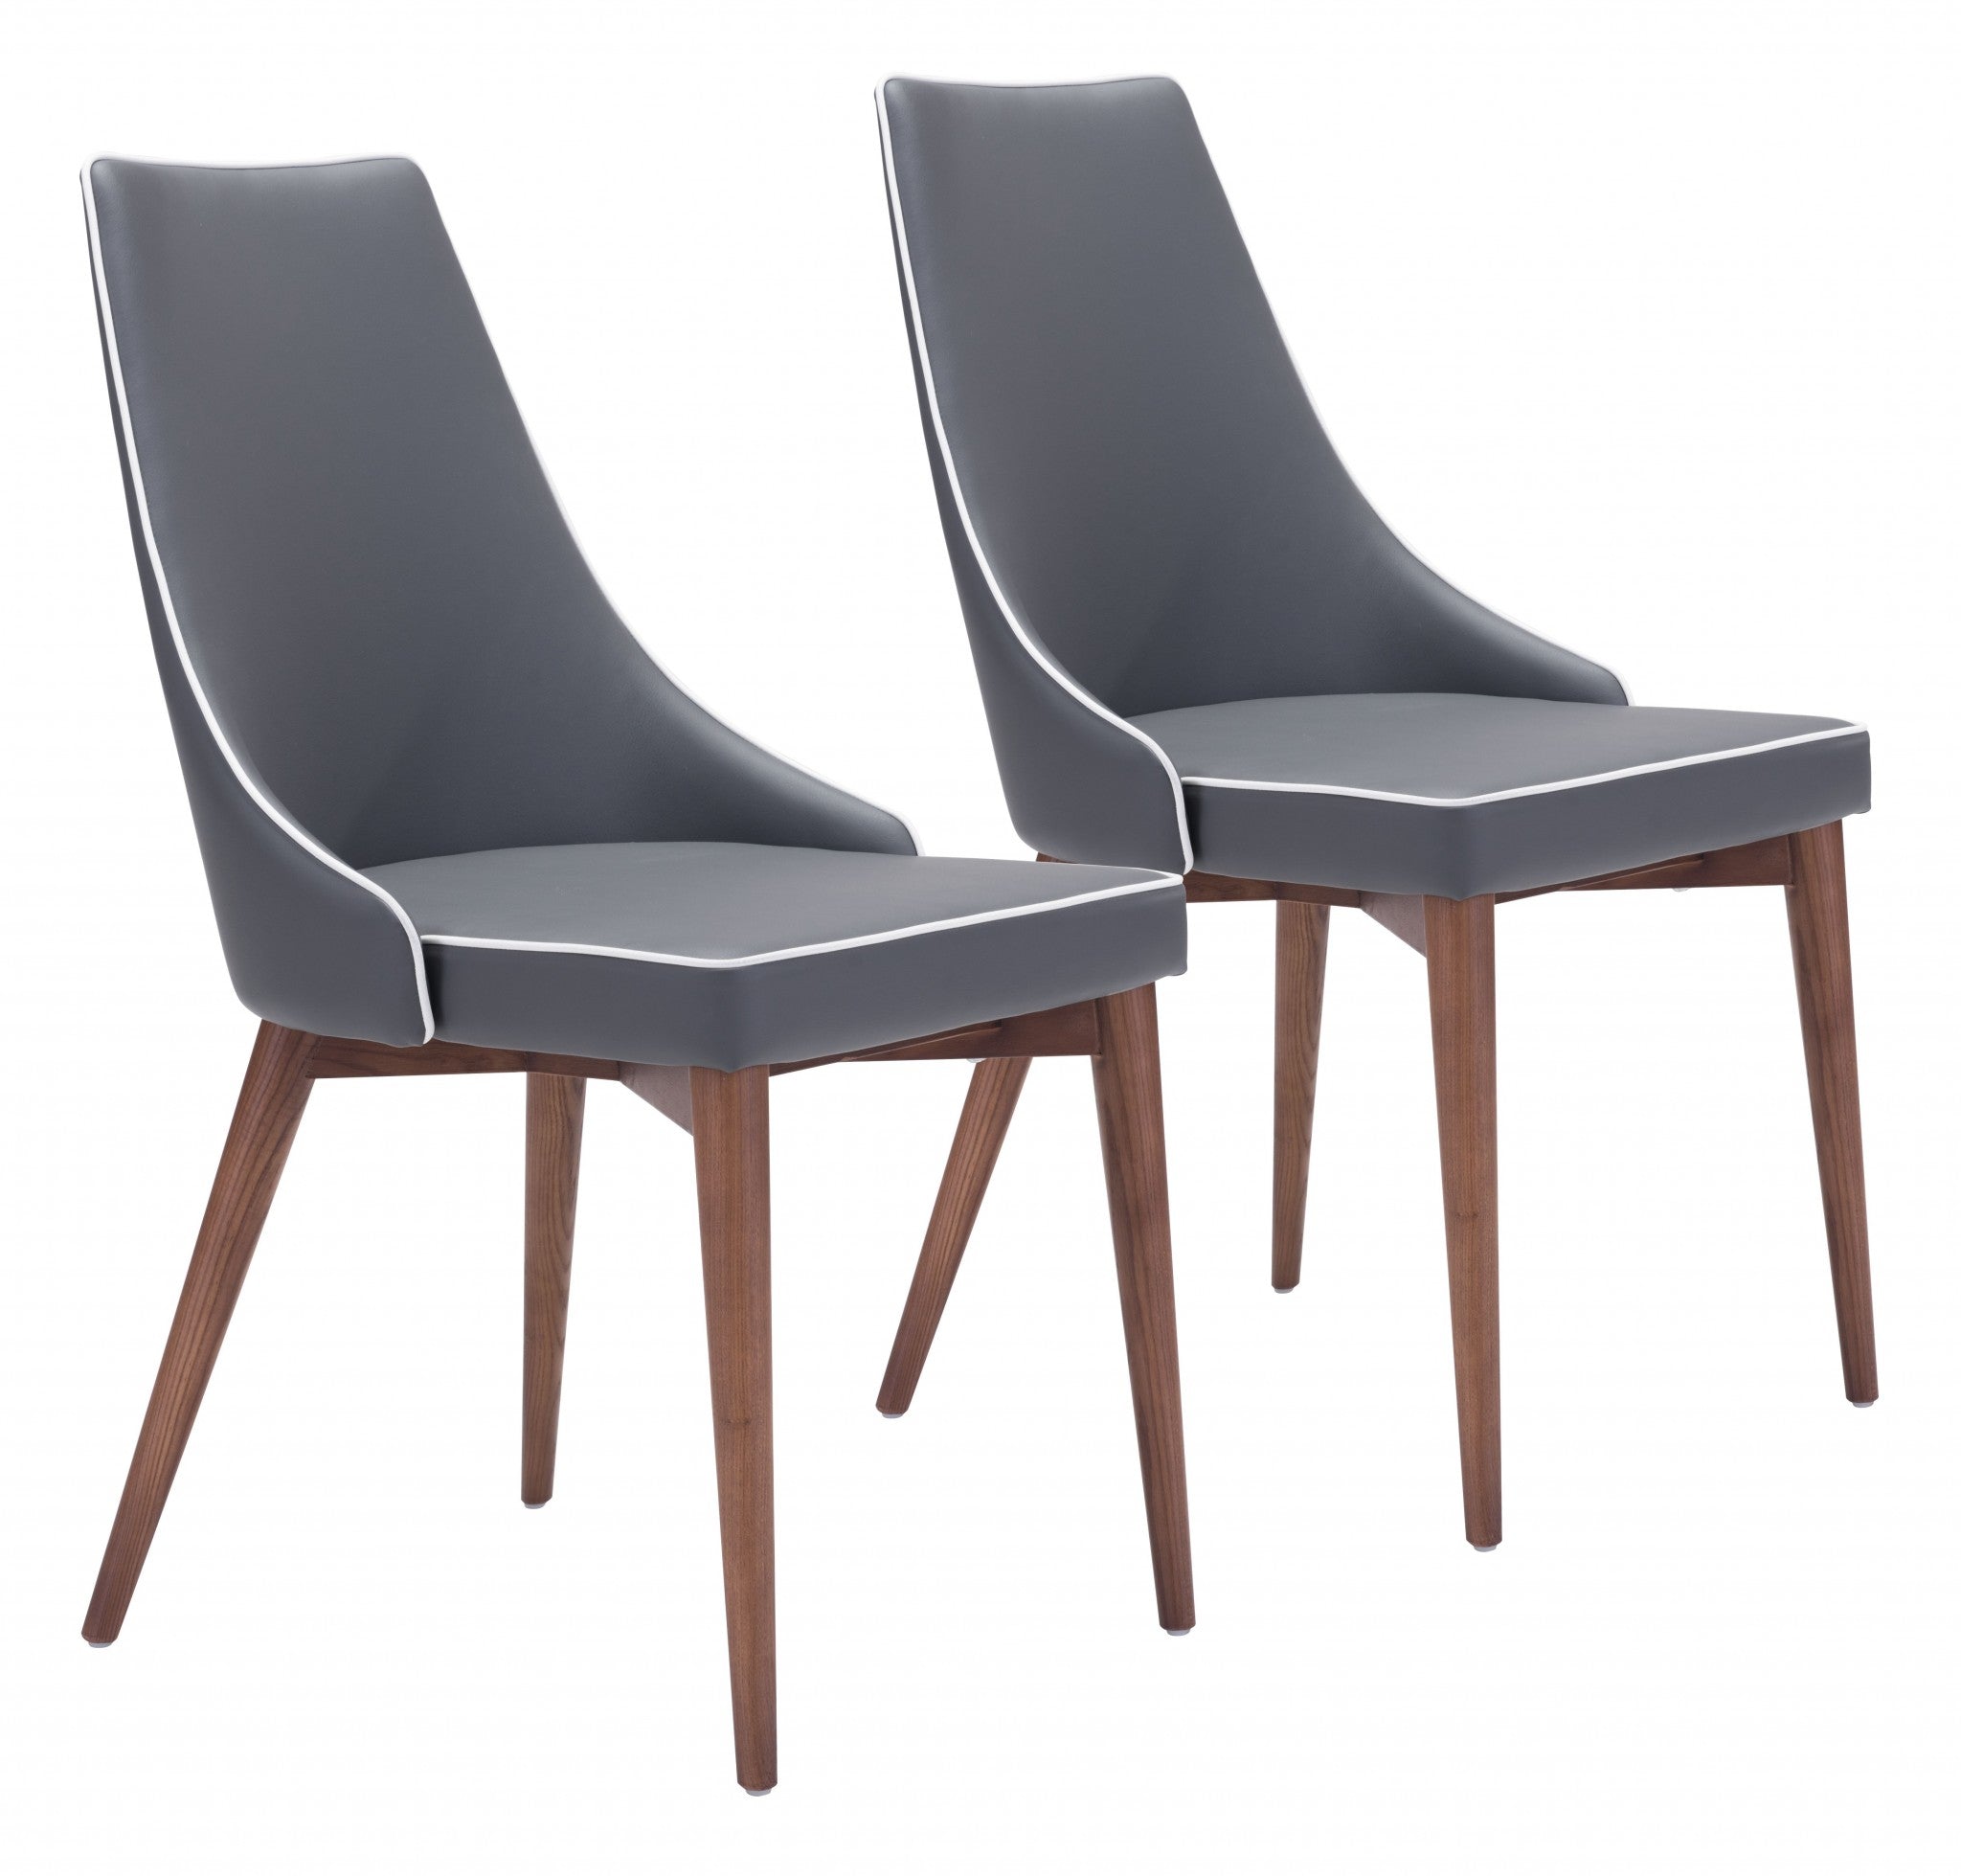 Set of Two Dark Gray with White Piping and Walnut Dining Chairs